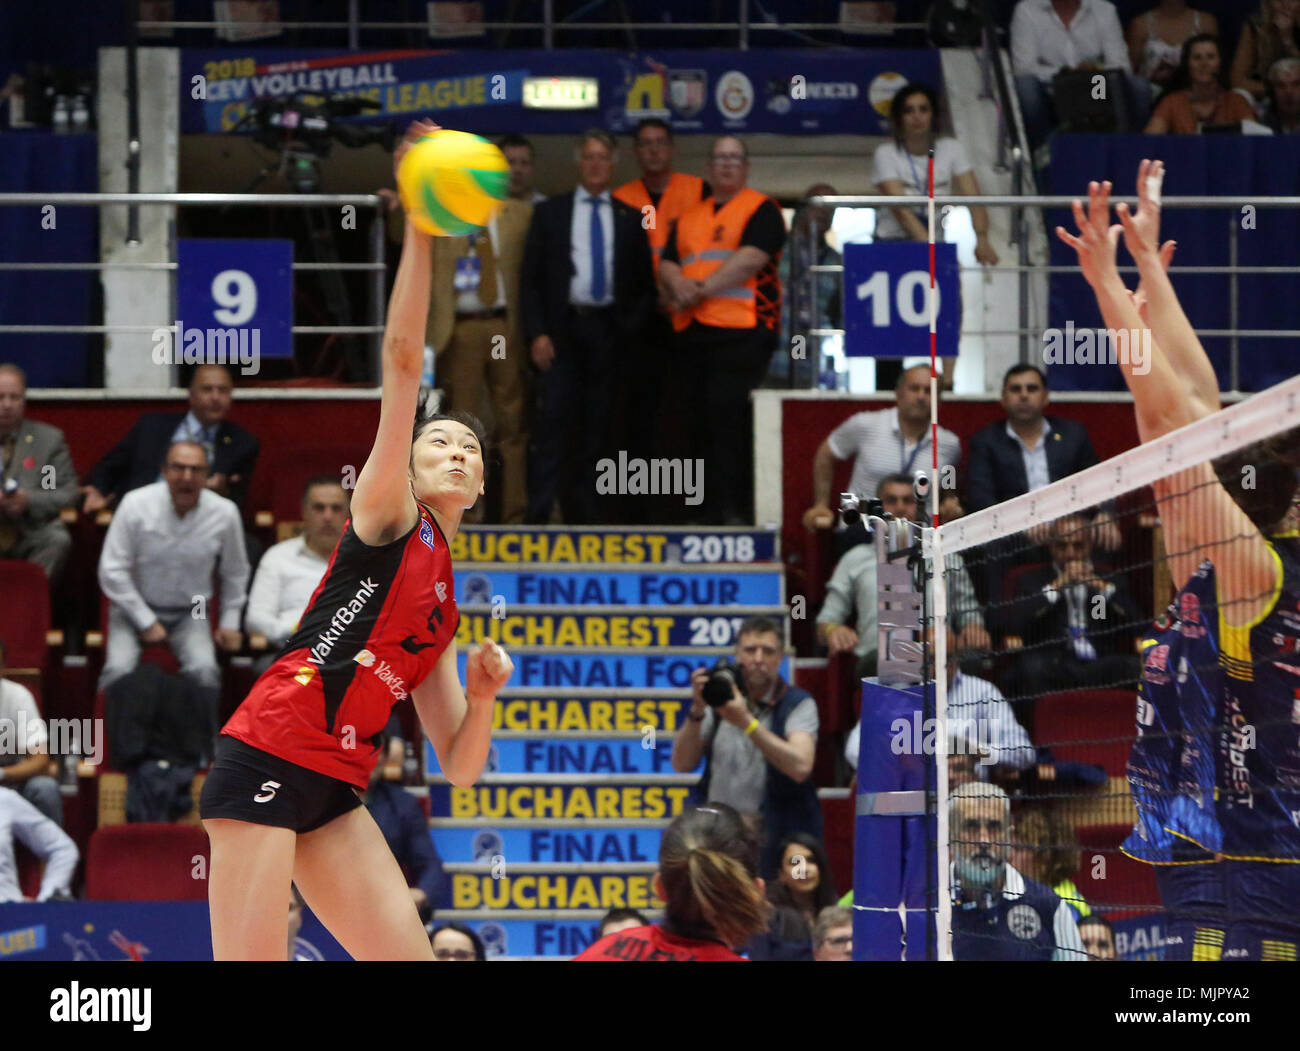 Bucharest, Romania. 5th May, 2018. Zhu Ting (L) of Turkey's Vakifbank  competes during the 2018 CEV Volleyball Champions League Final Four against  Italy's Imoco Volley Conegliano in Bucharest, Romania, May 5, 2018.